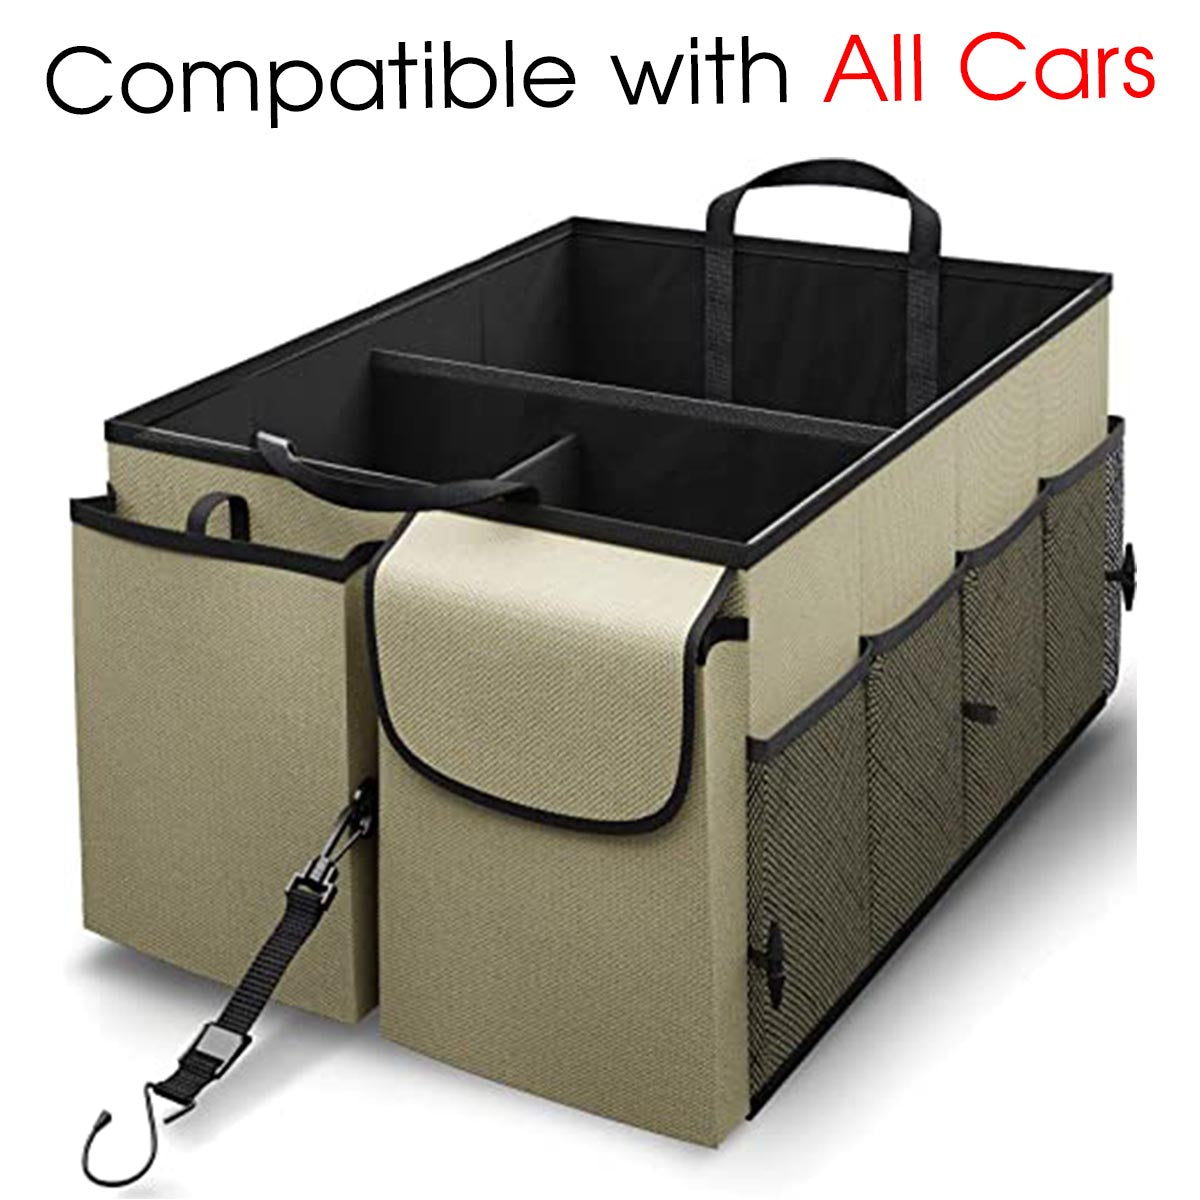 Car Trunk Organizer - Collapsible, Custom fit for All Cars, Multi-Compartment Automotive SUV Car Organizer for Storage w/ Adjustable Straps - Car Accessories for Women and Men LR12993